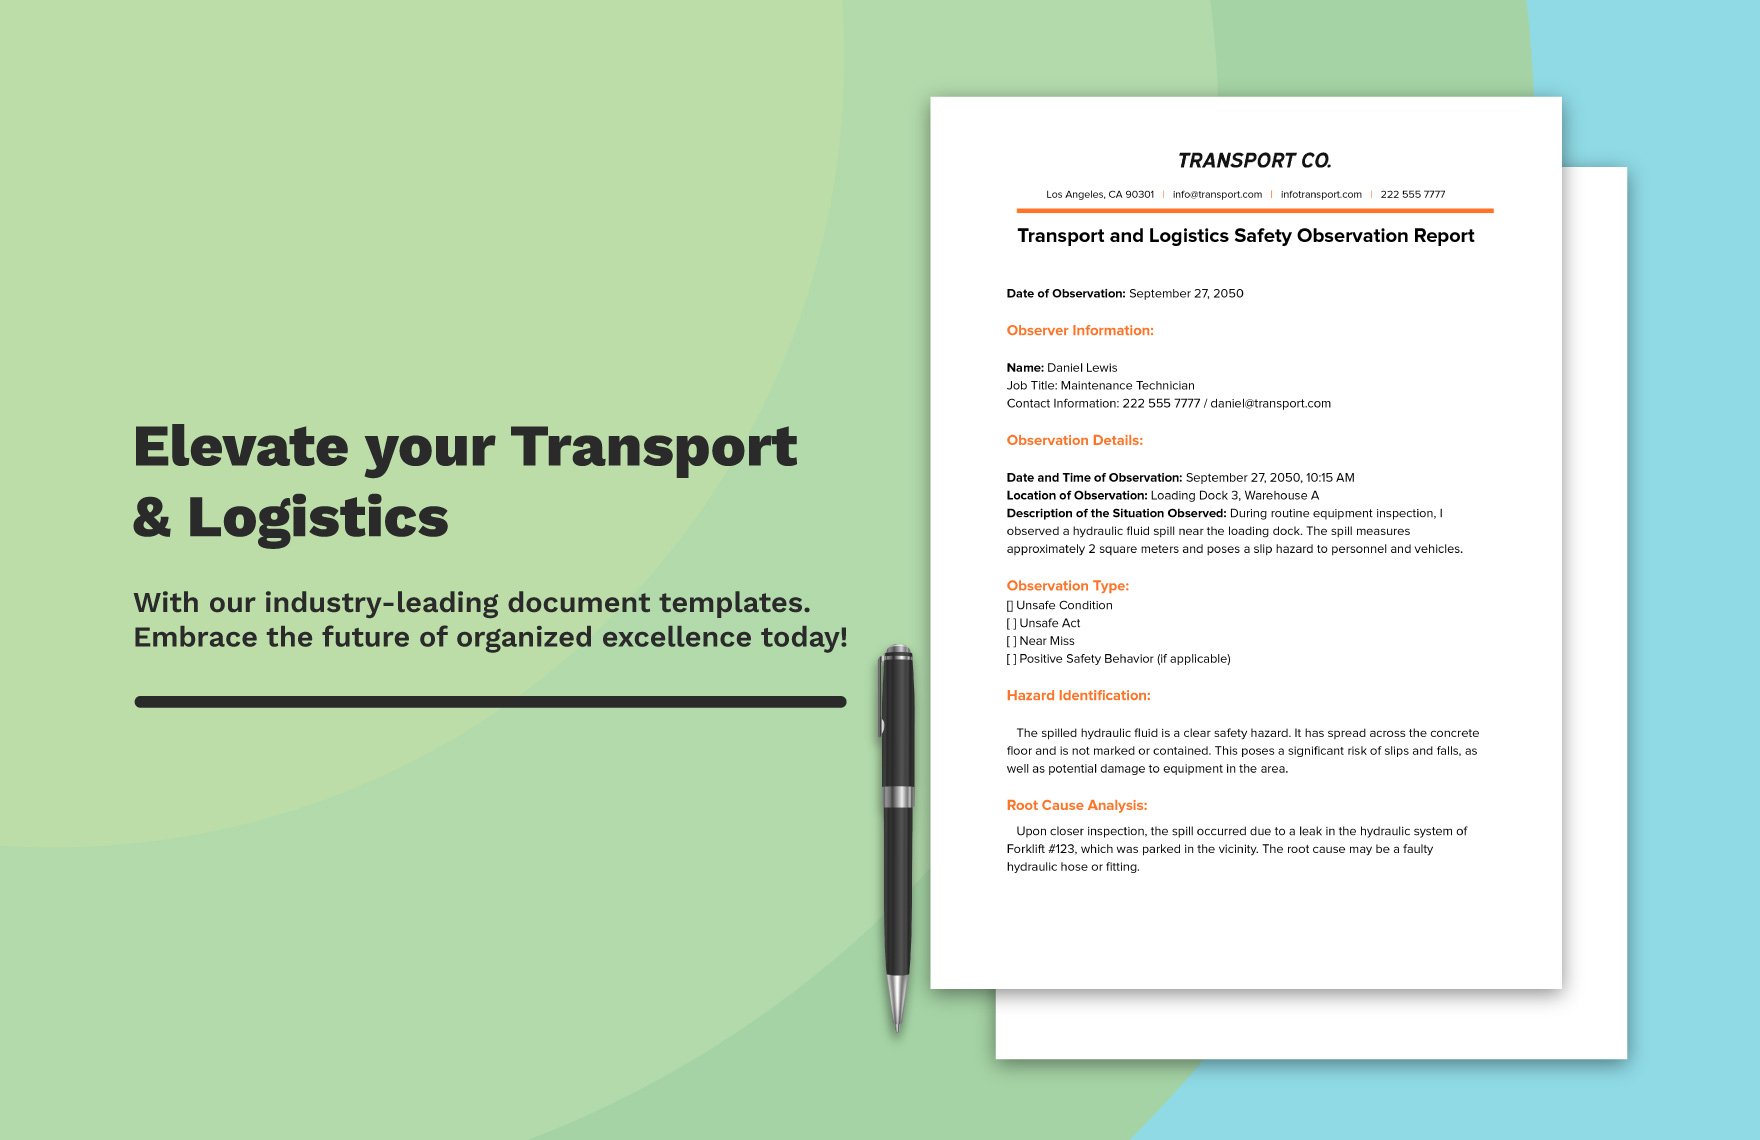 Transport and Logistics Safety Observation Report Template